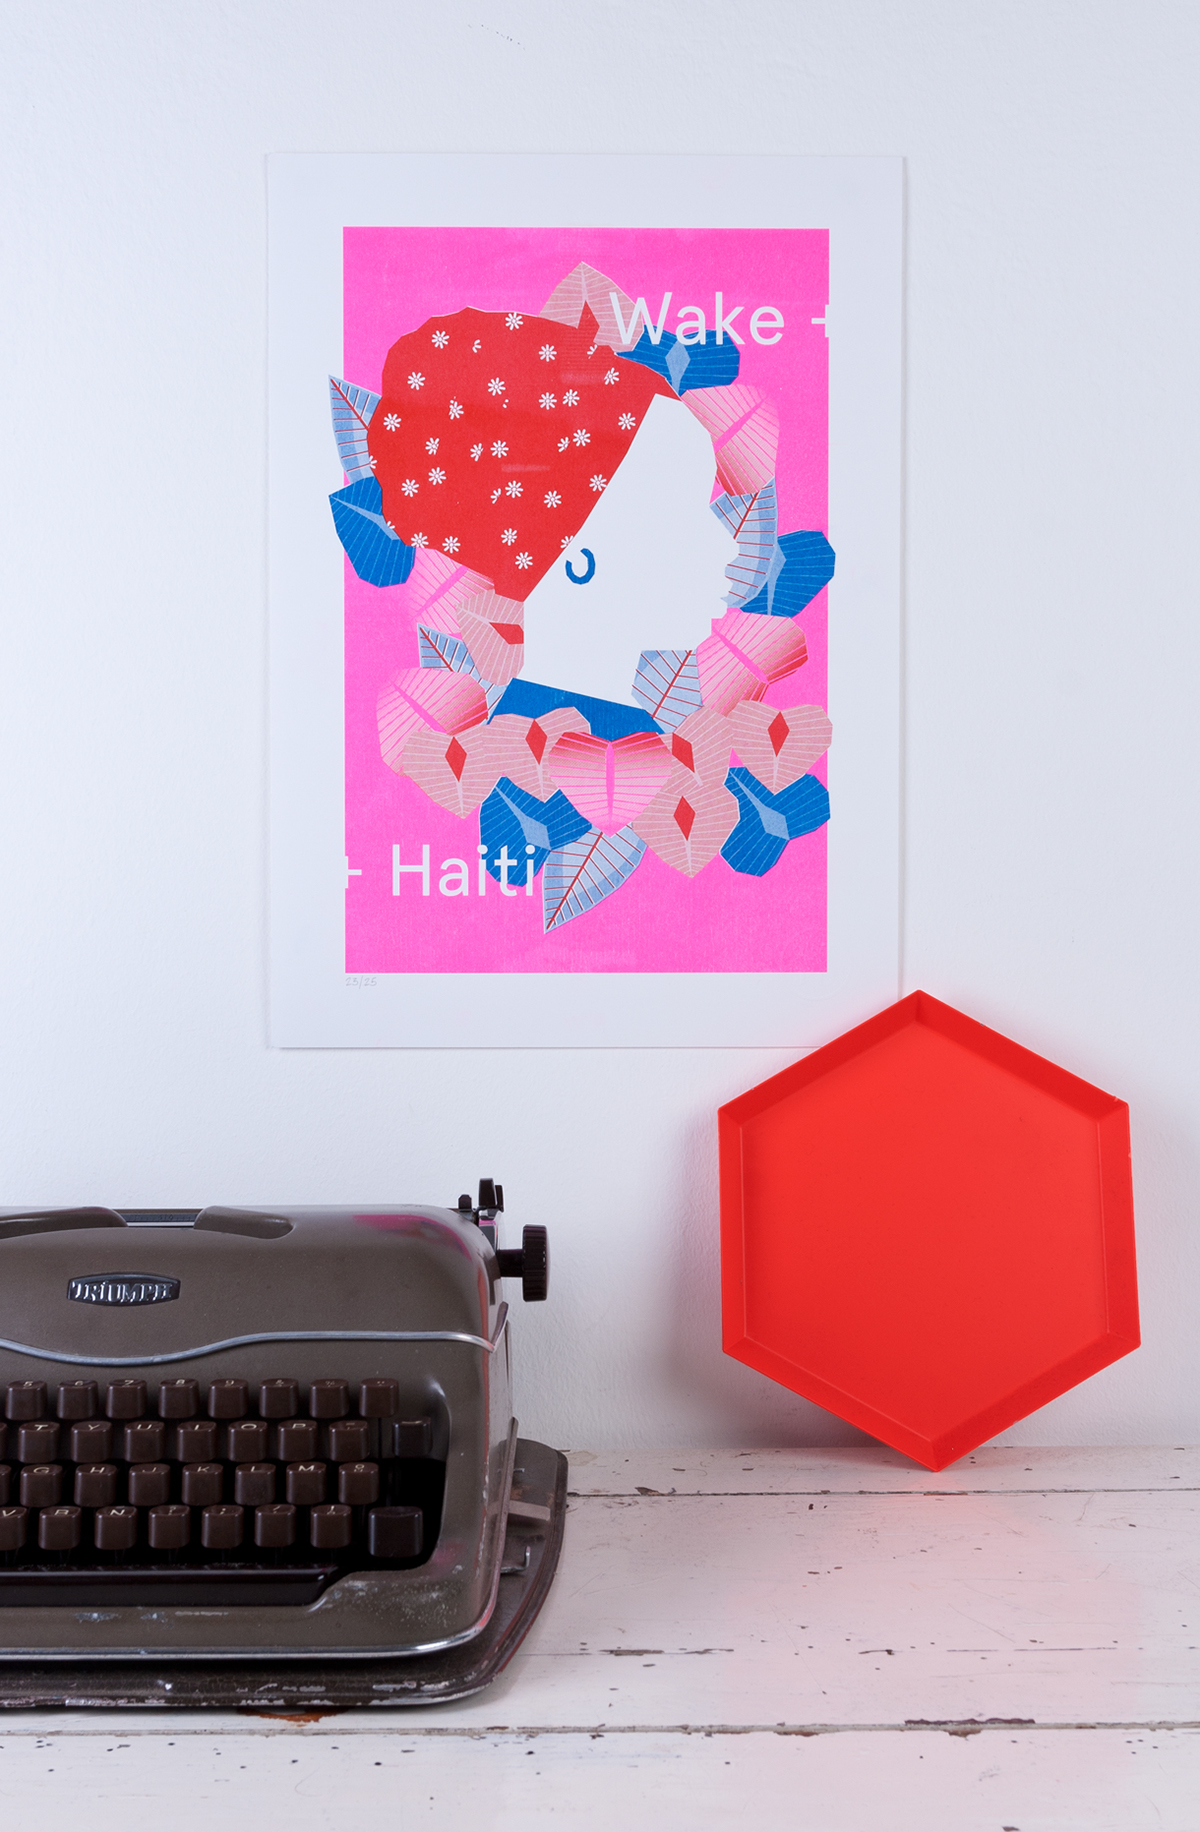 Haiti leafs charity profile silouette risograph printing risograph fluo pink blue red